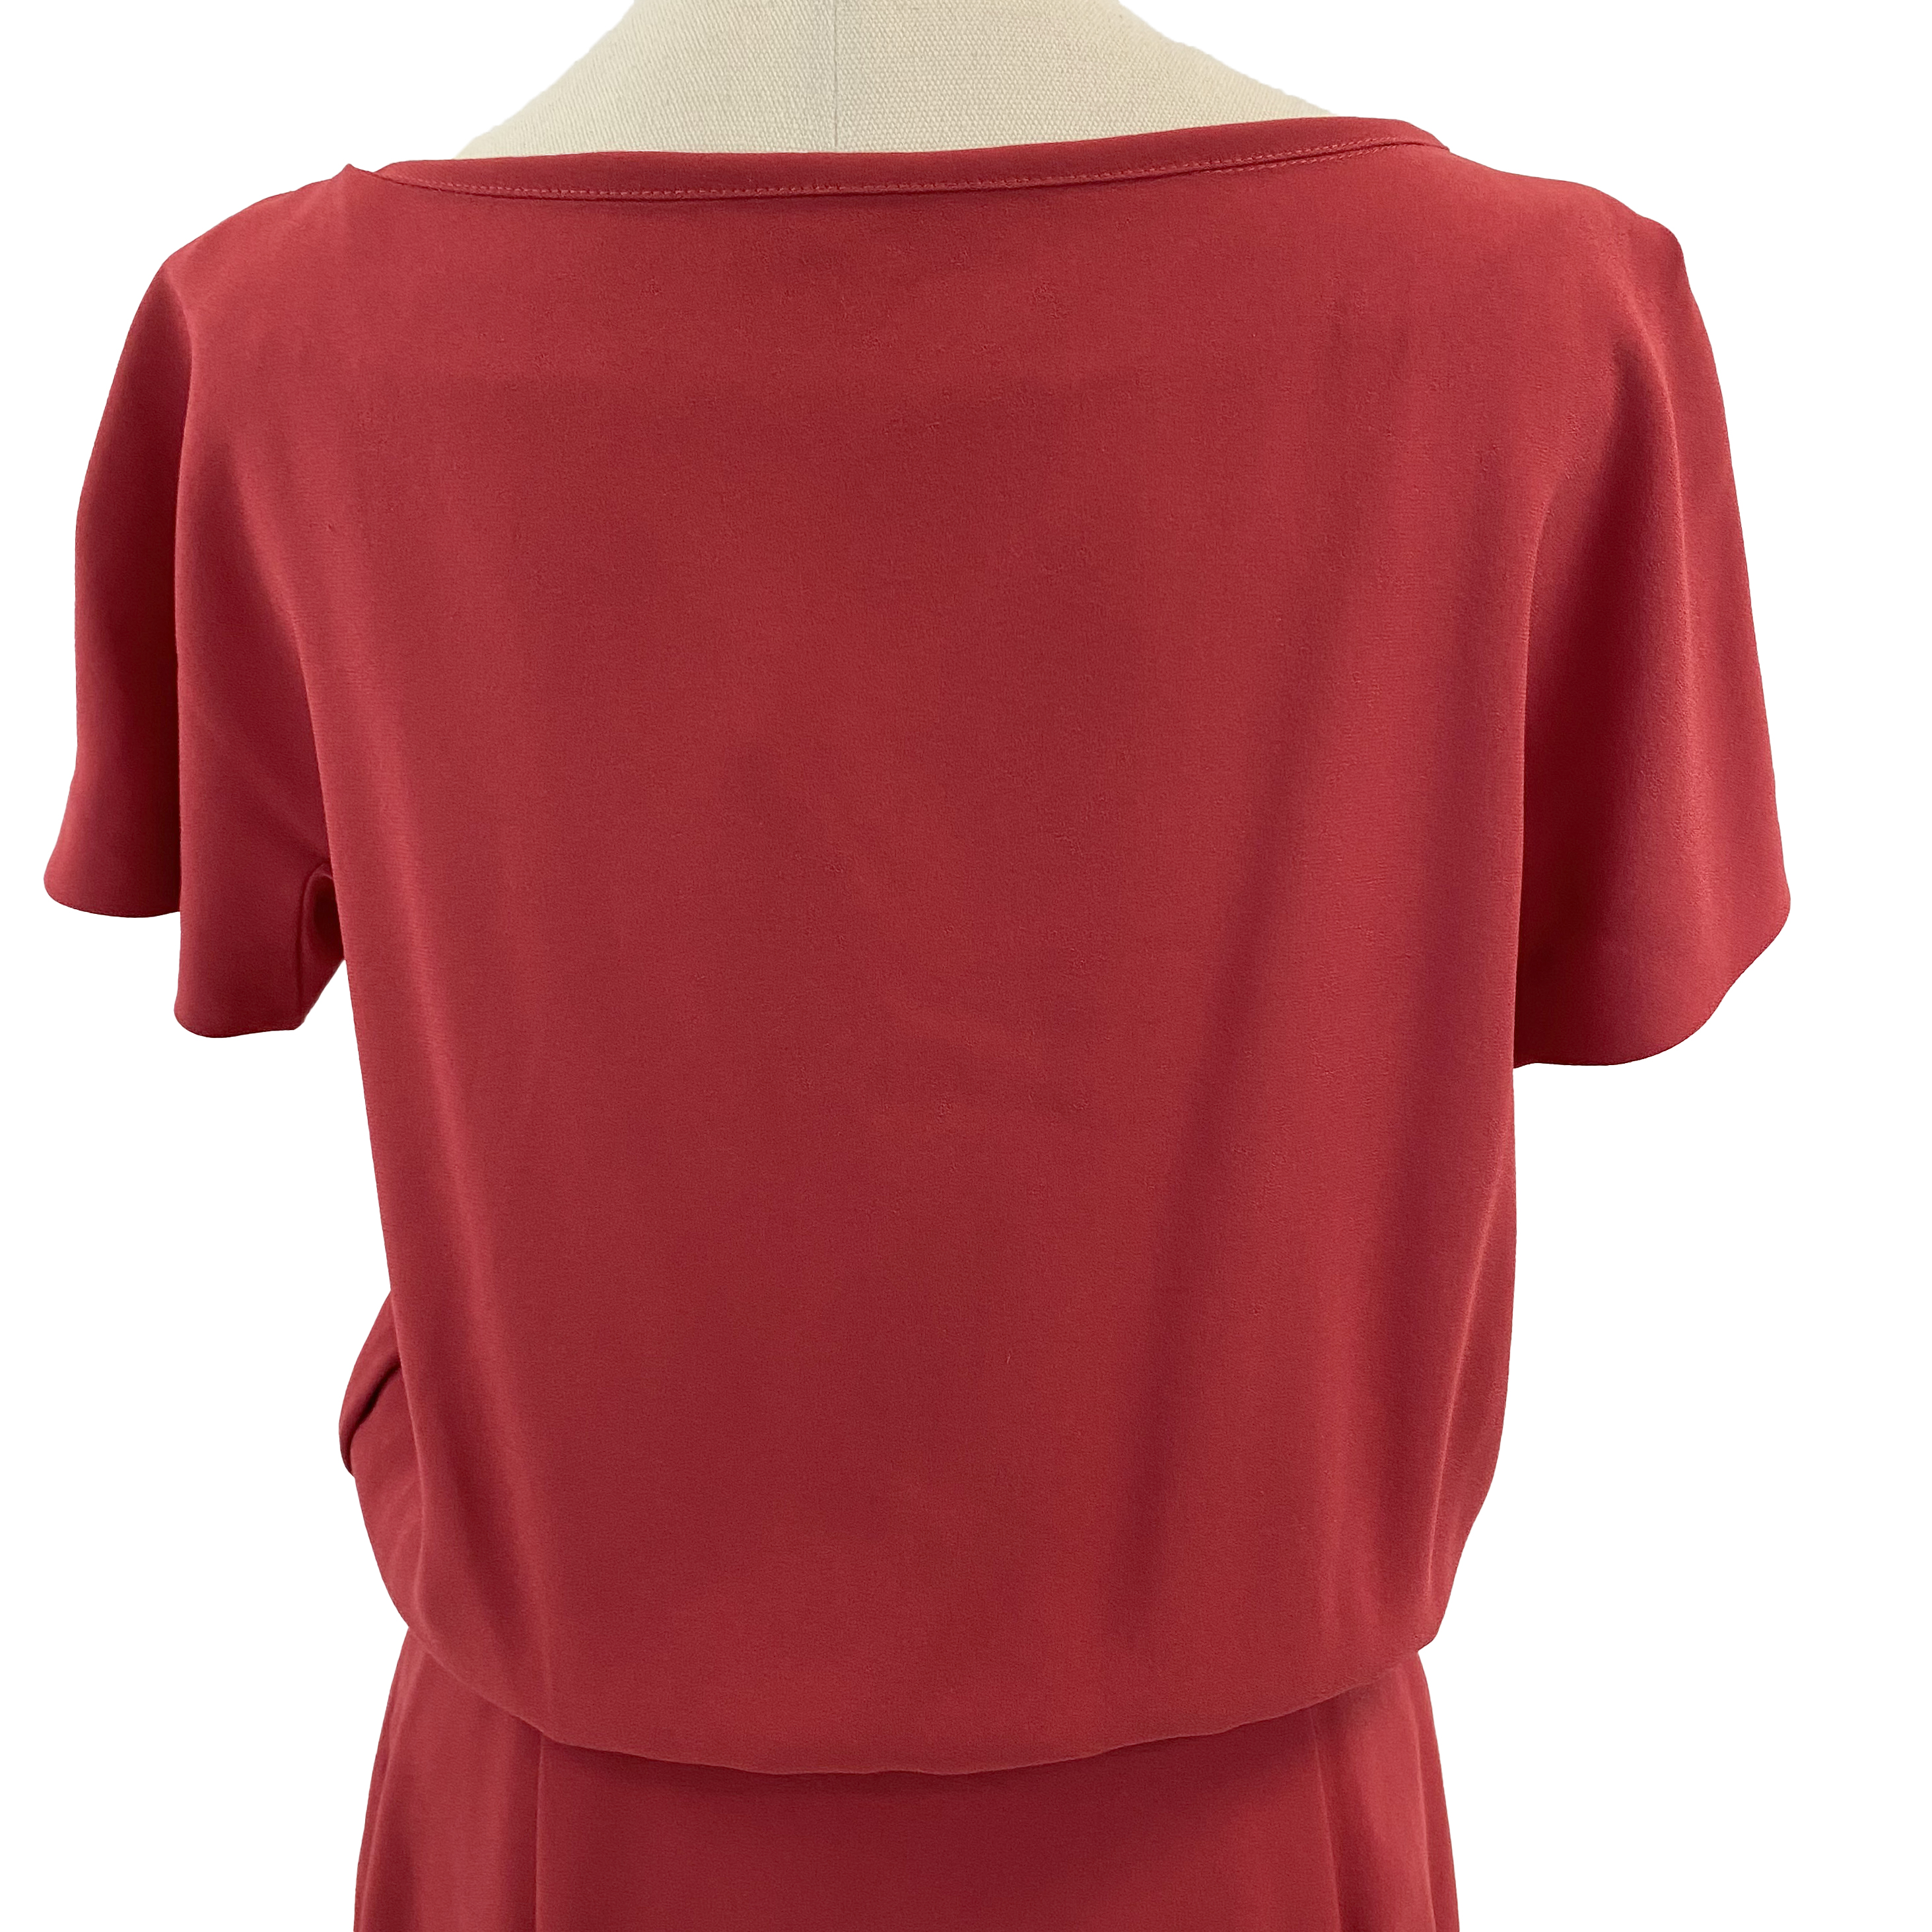 Moschino Red Boat-neck Short-sleeved Dress 